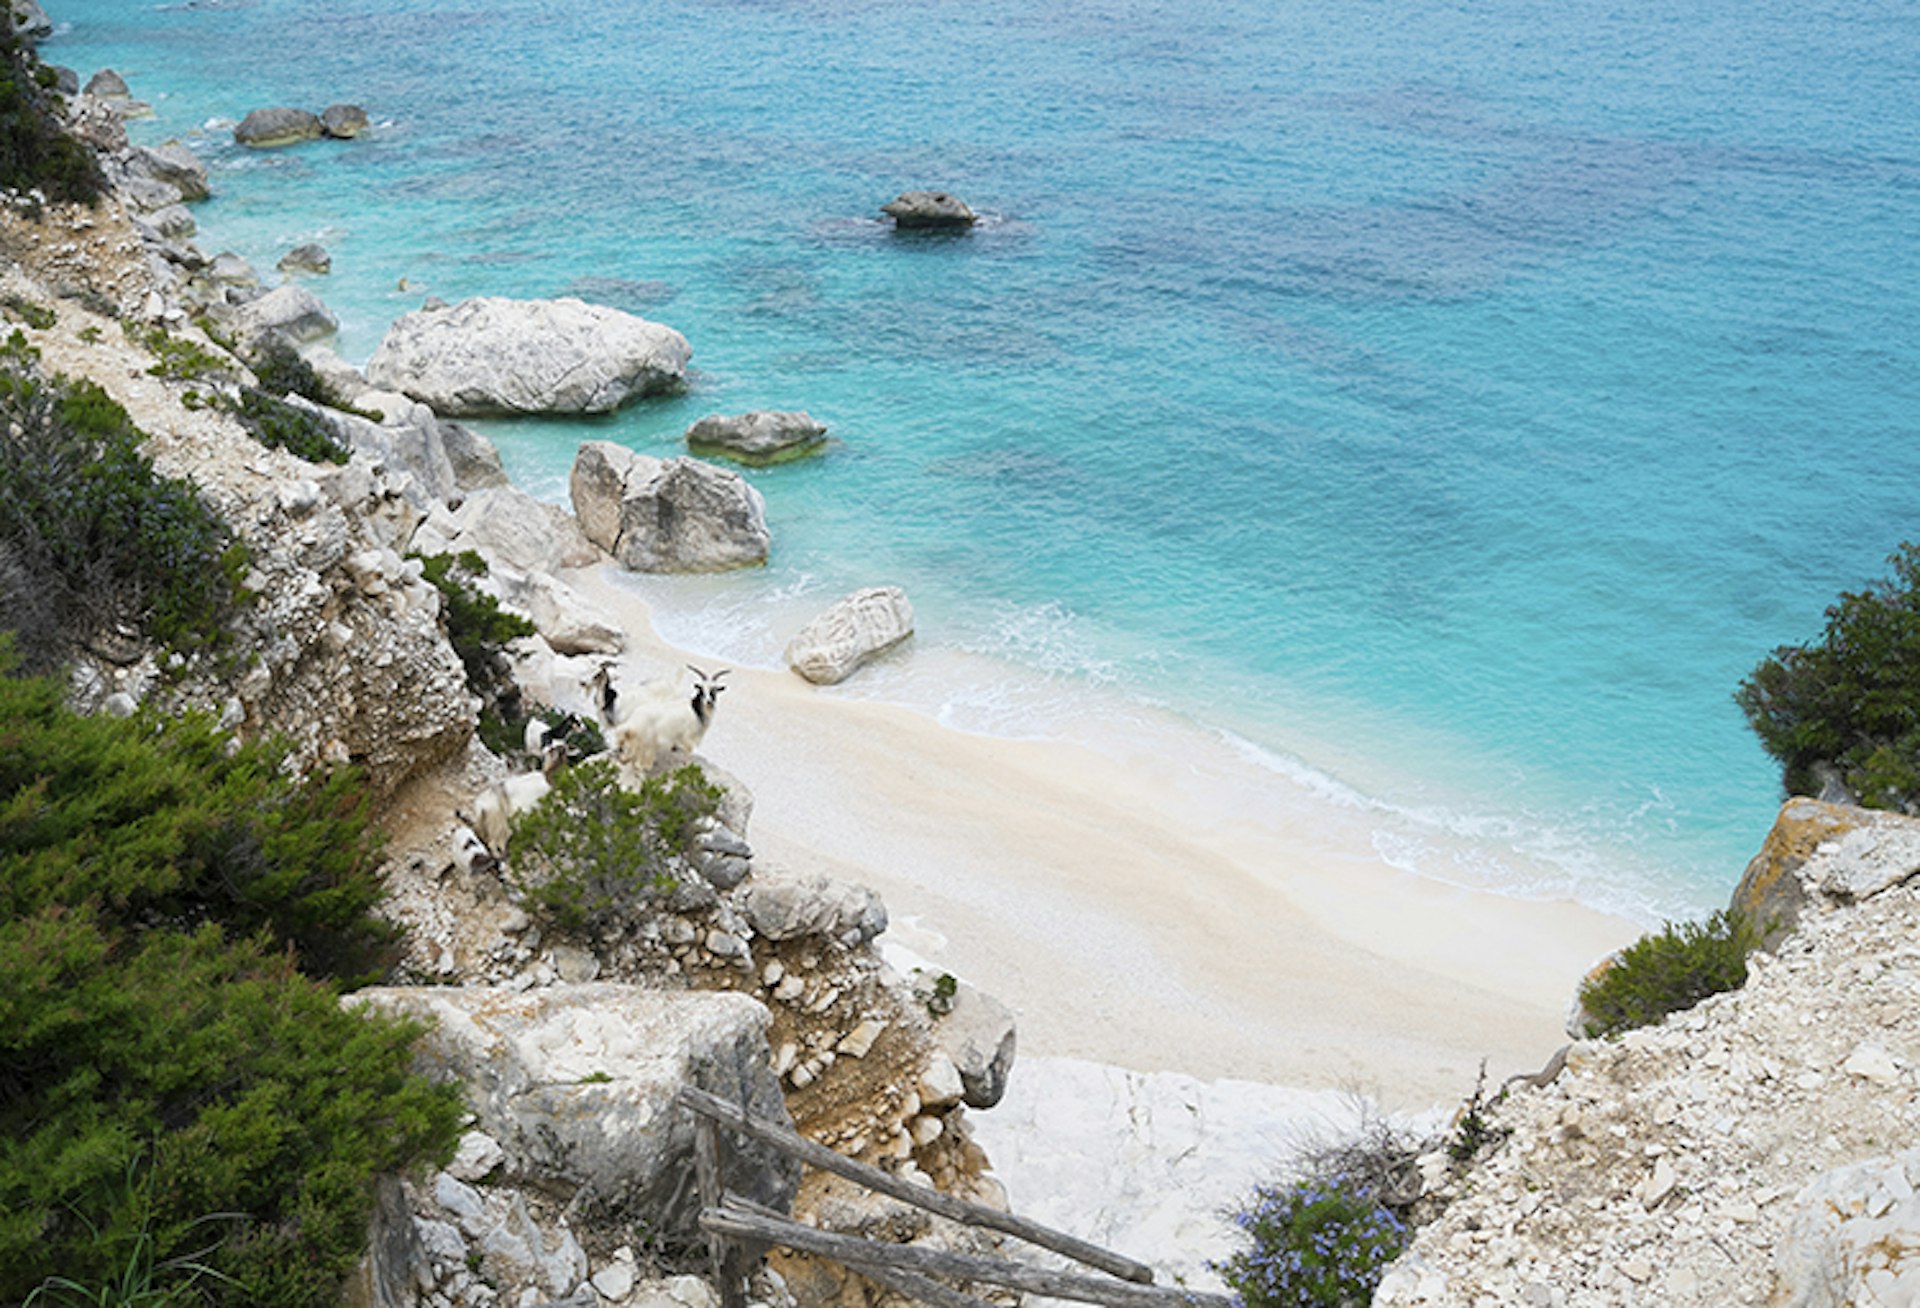 The effort of reaching Cala Goloritzé is half the fun. Image by elisalocci / iStock / Getty Images